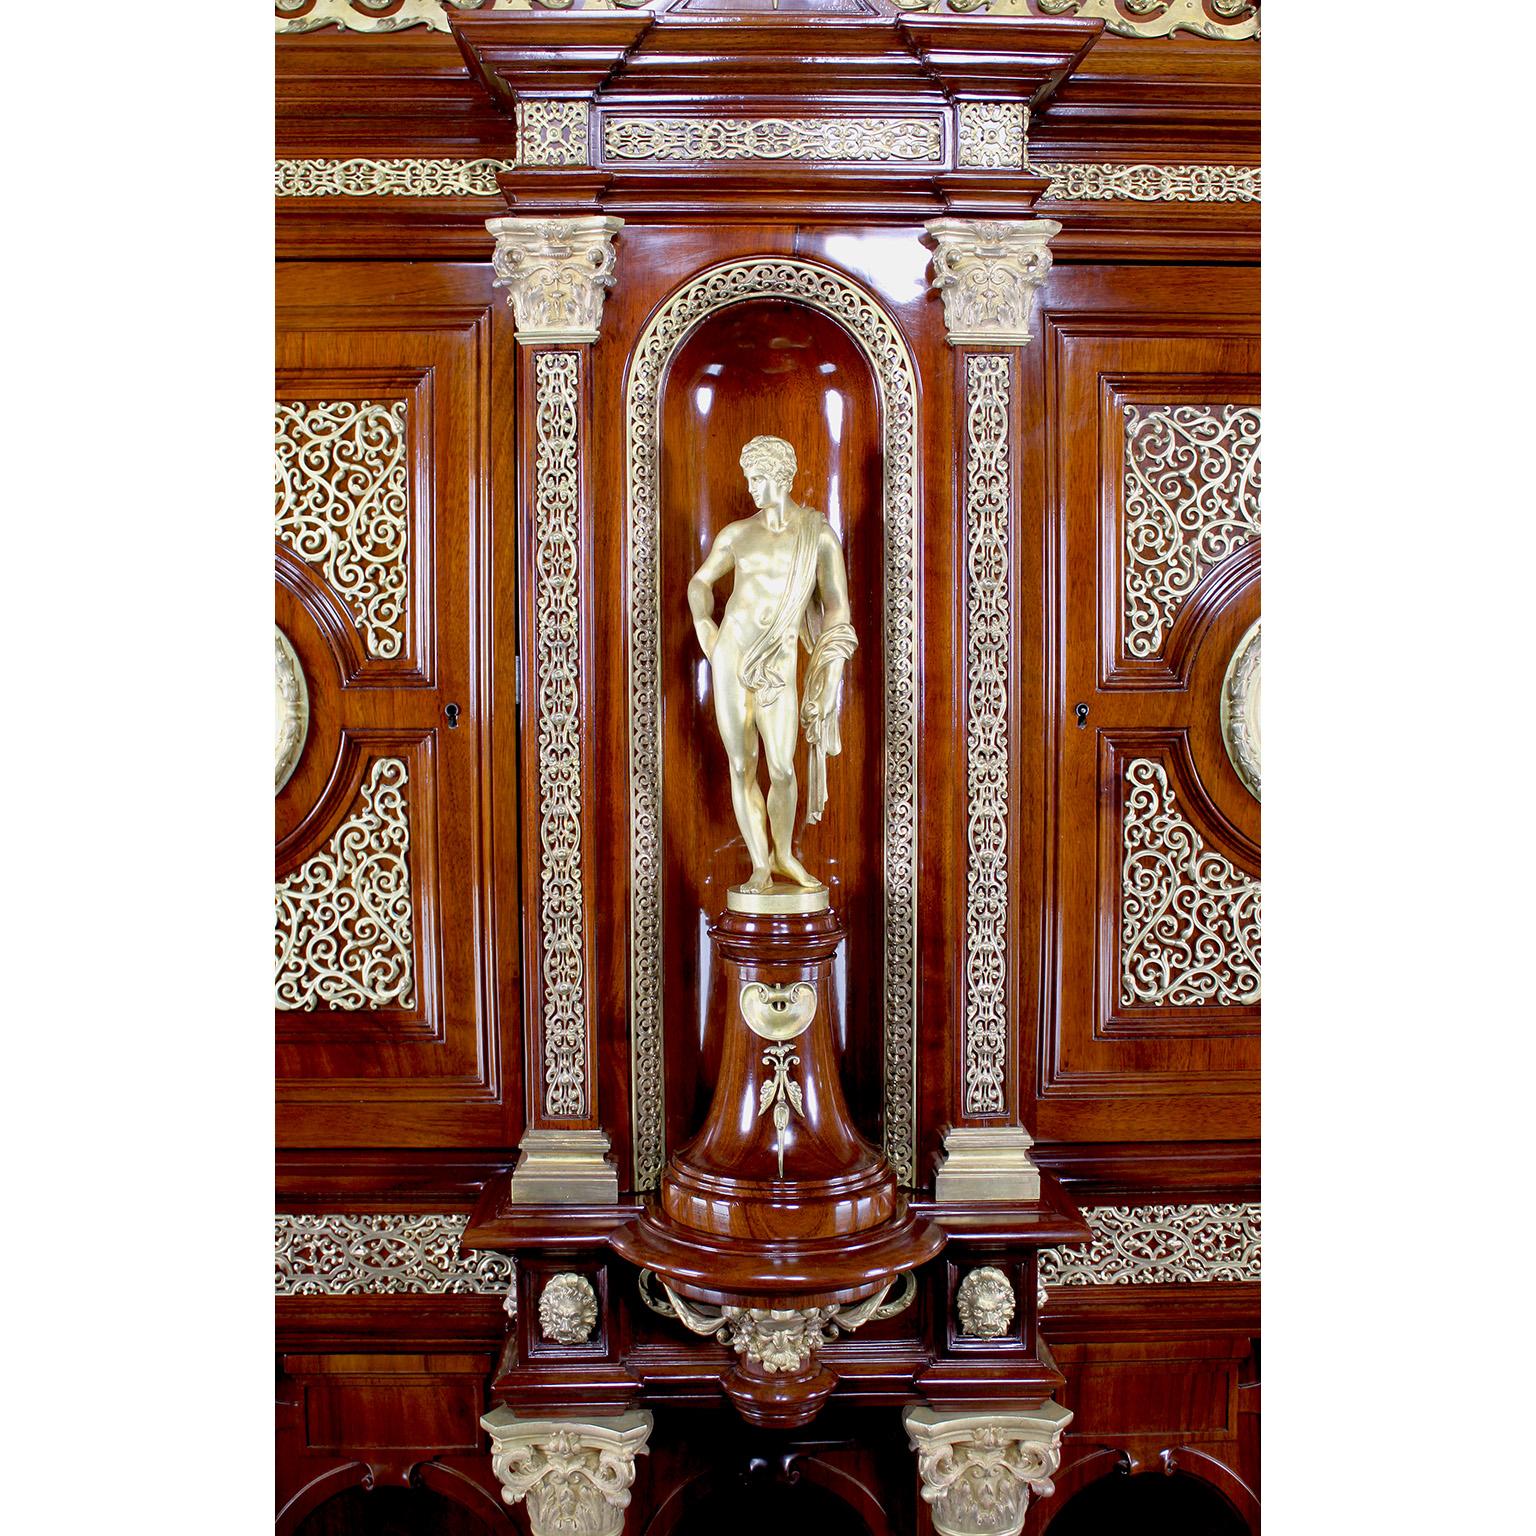 Carved Fine 19th C. French Gilt-Bronze Mounted Cabinet by Edouard Lievre & Paul Sormani For Sale